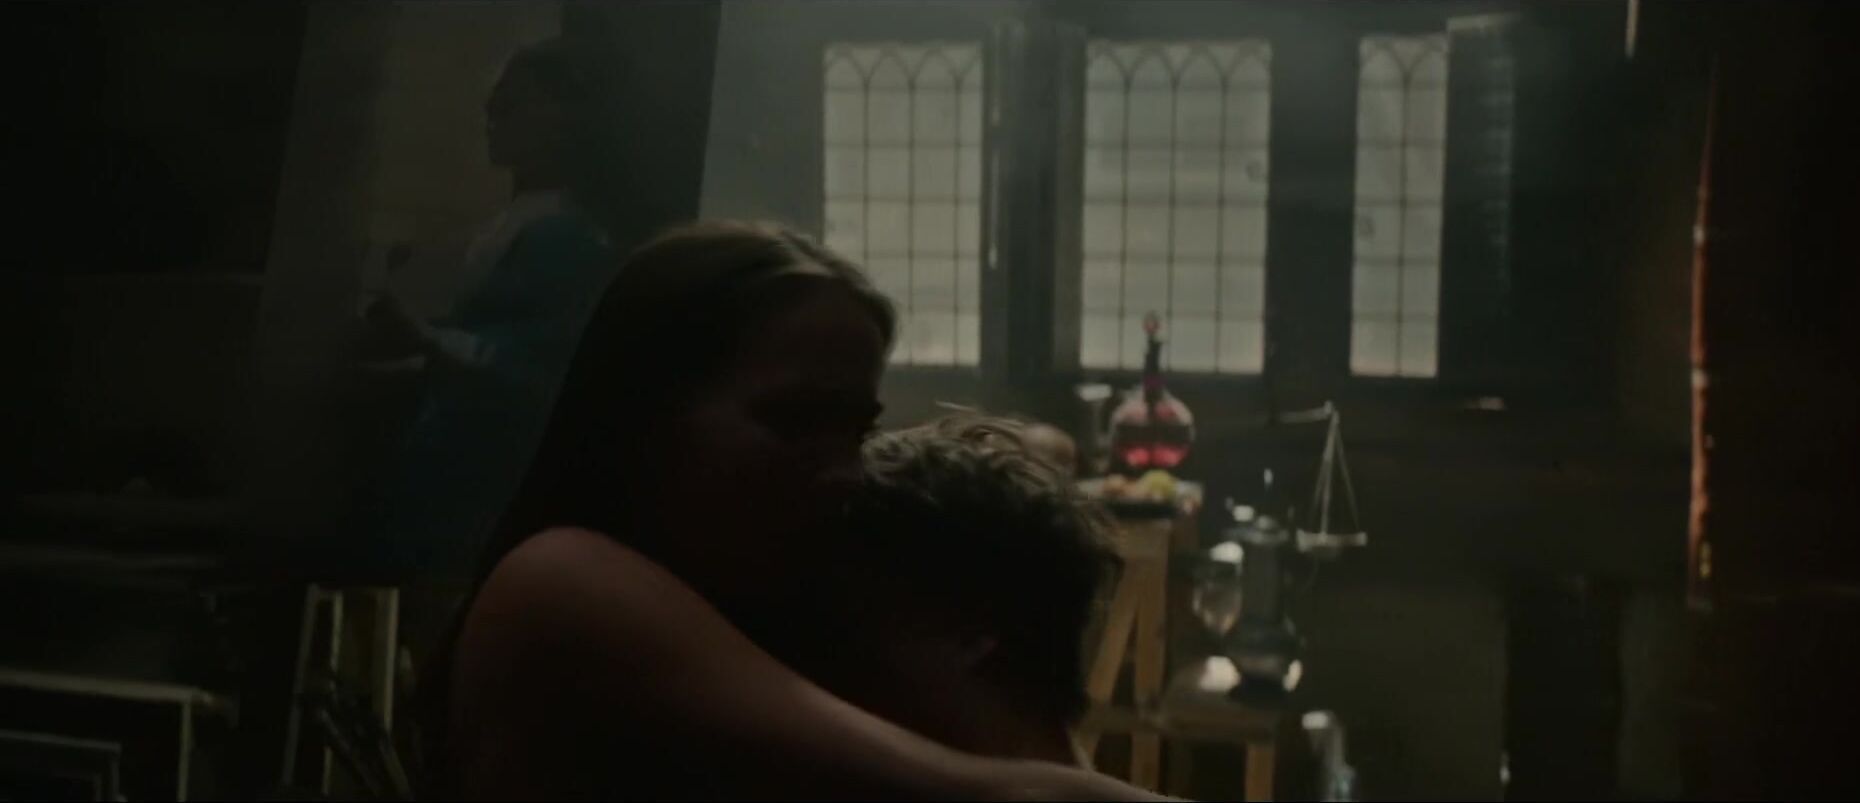 Blows Hot sex scenes of Alicia Vikander and other actresses being penetrated in Tulip Fever Spooning - 1